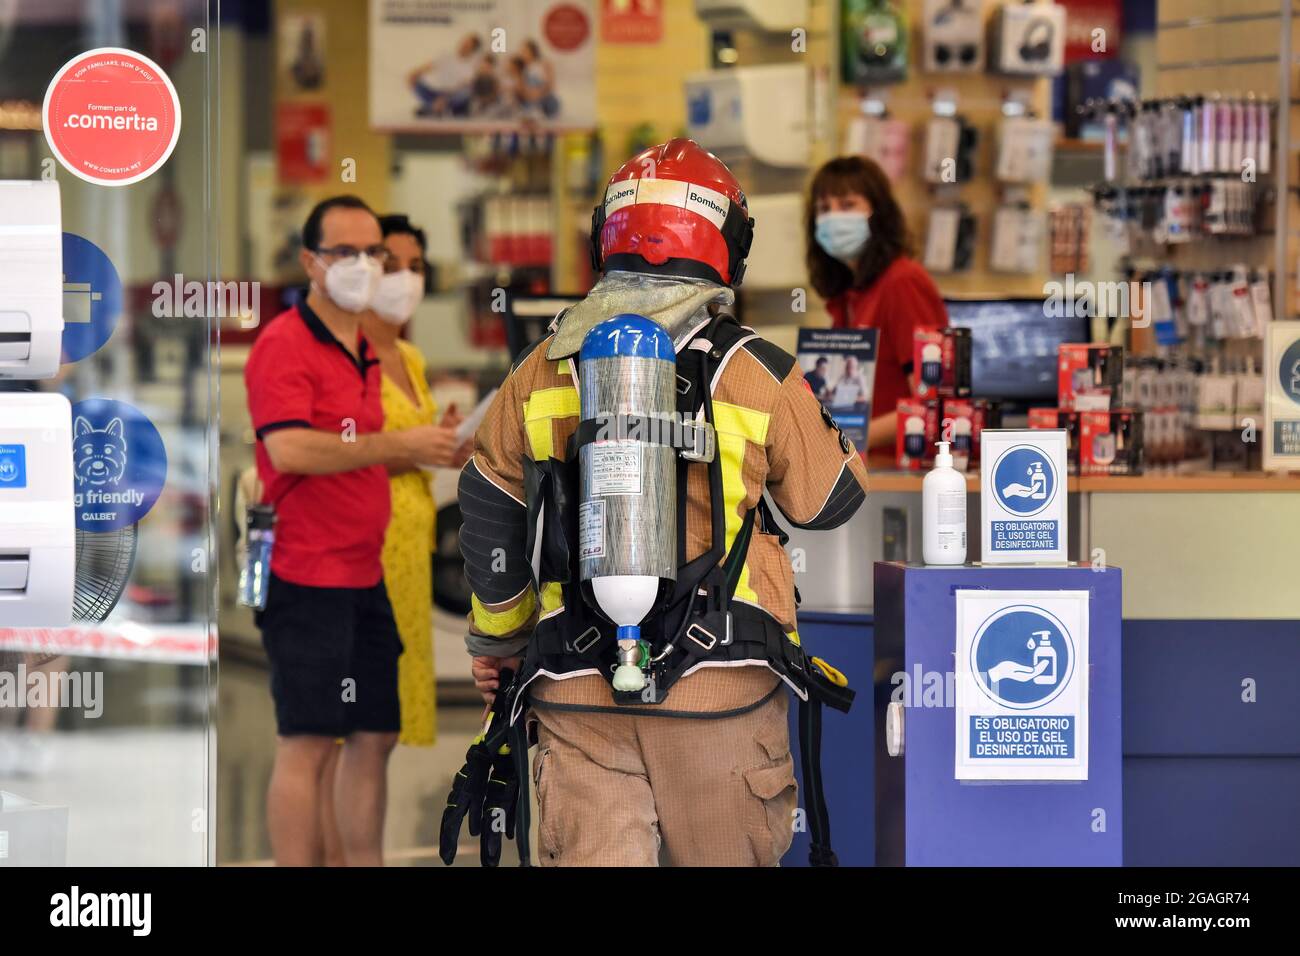 A Catalonia Firefighter talks with the workers of an electrical appliance store about a possible gas leak in Vendrell. A strong smell of gas alerted the residents of San Jordi Street, Vendrell where three teams of Catalonia Firefighters and several Local Police patrols attended closing access to the affected area. Firefighters with the help of technicians of the gas company began the gas measurements since the smell was coming from the underground sewer network and the presence of vapors or levels of propane, butane or natural gas was ruled out, hence a gas leak was ruled out and the possibili Stock Photo